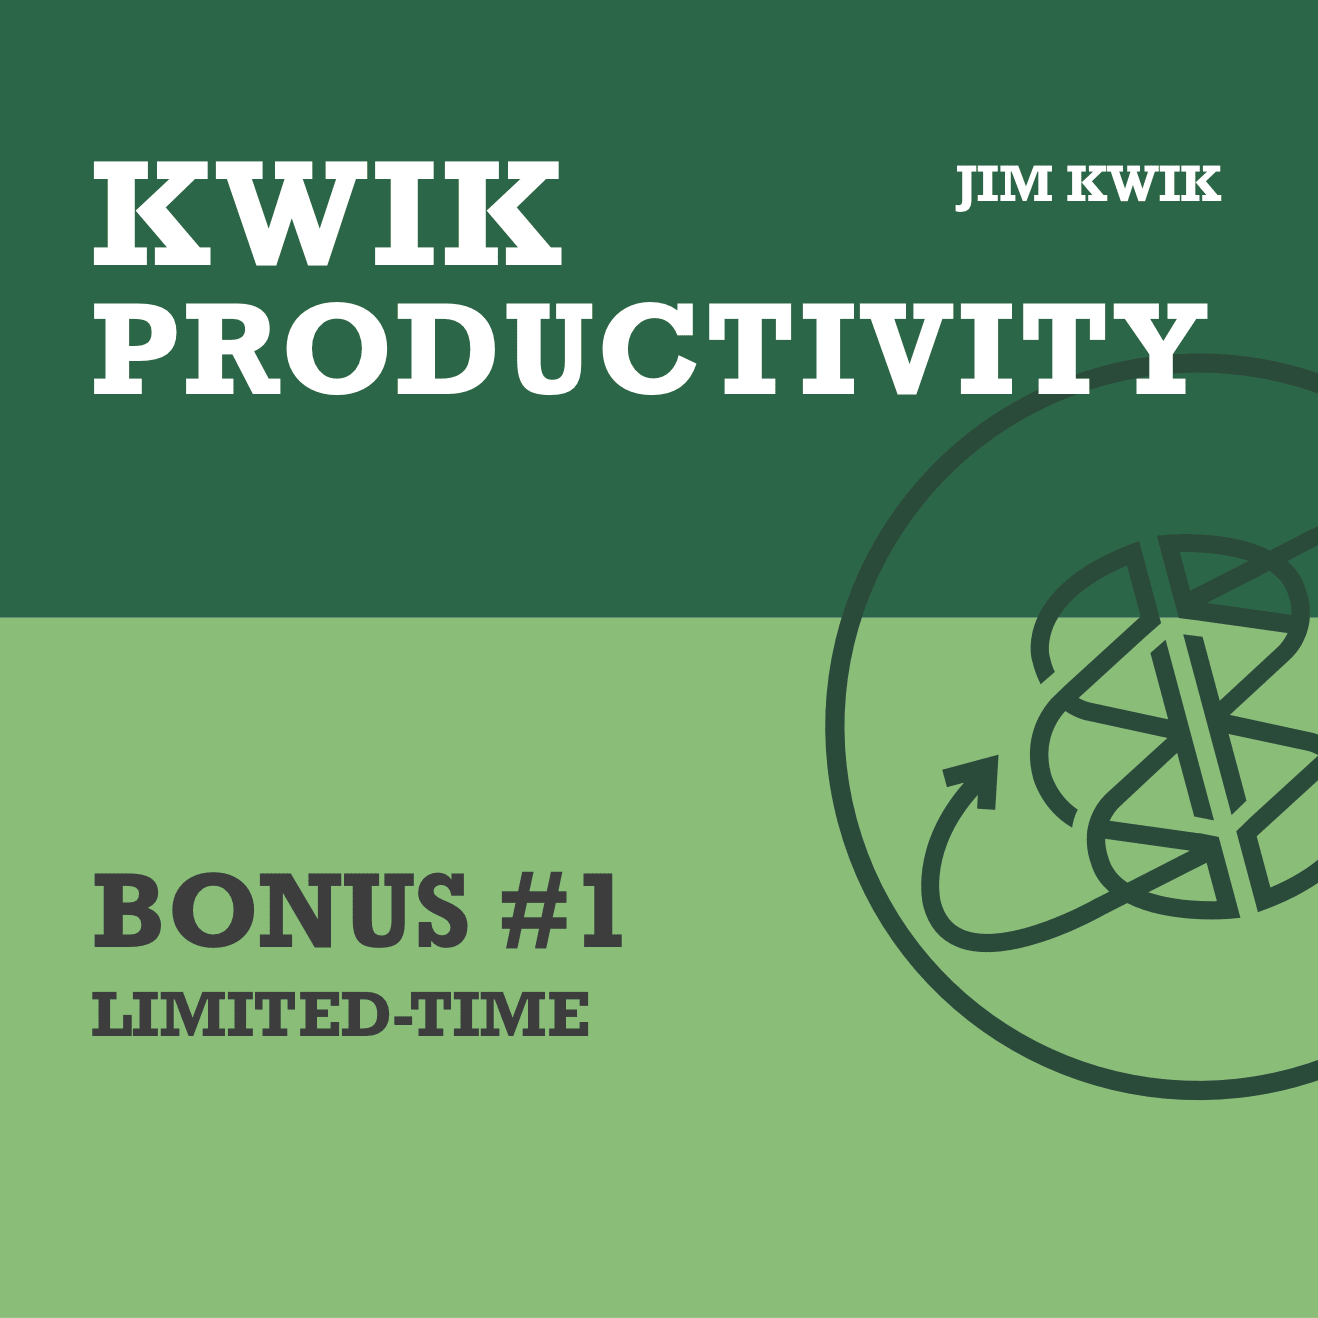 You are currently viewing Jim Kwik – Kwik Productivity